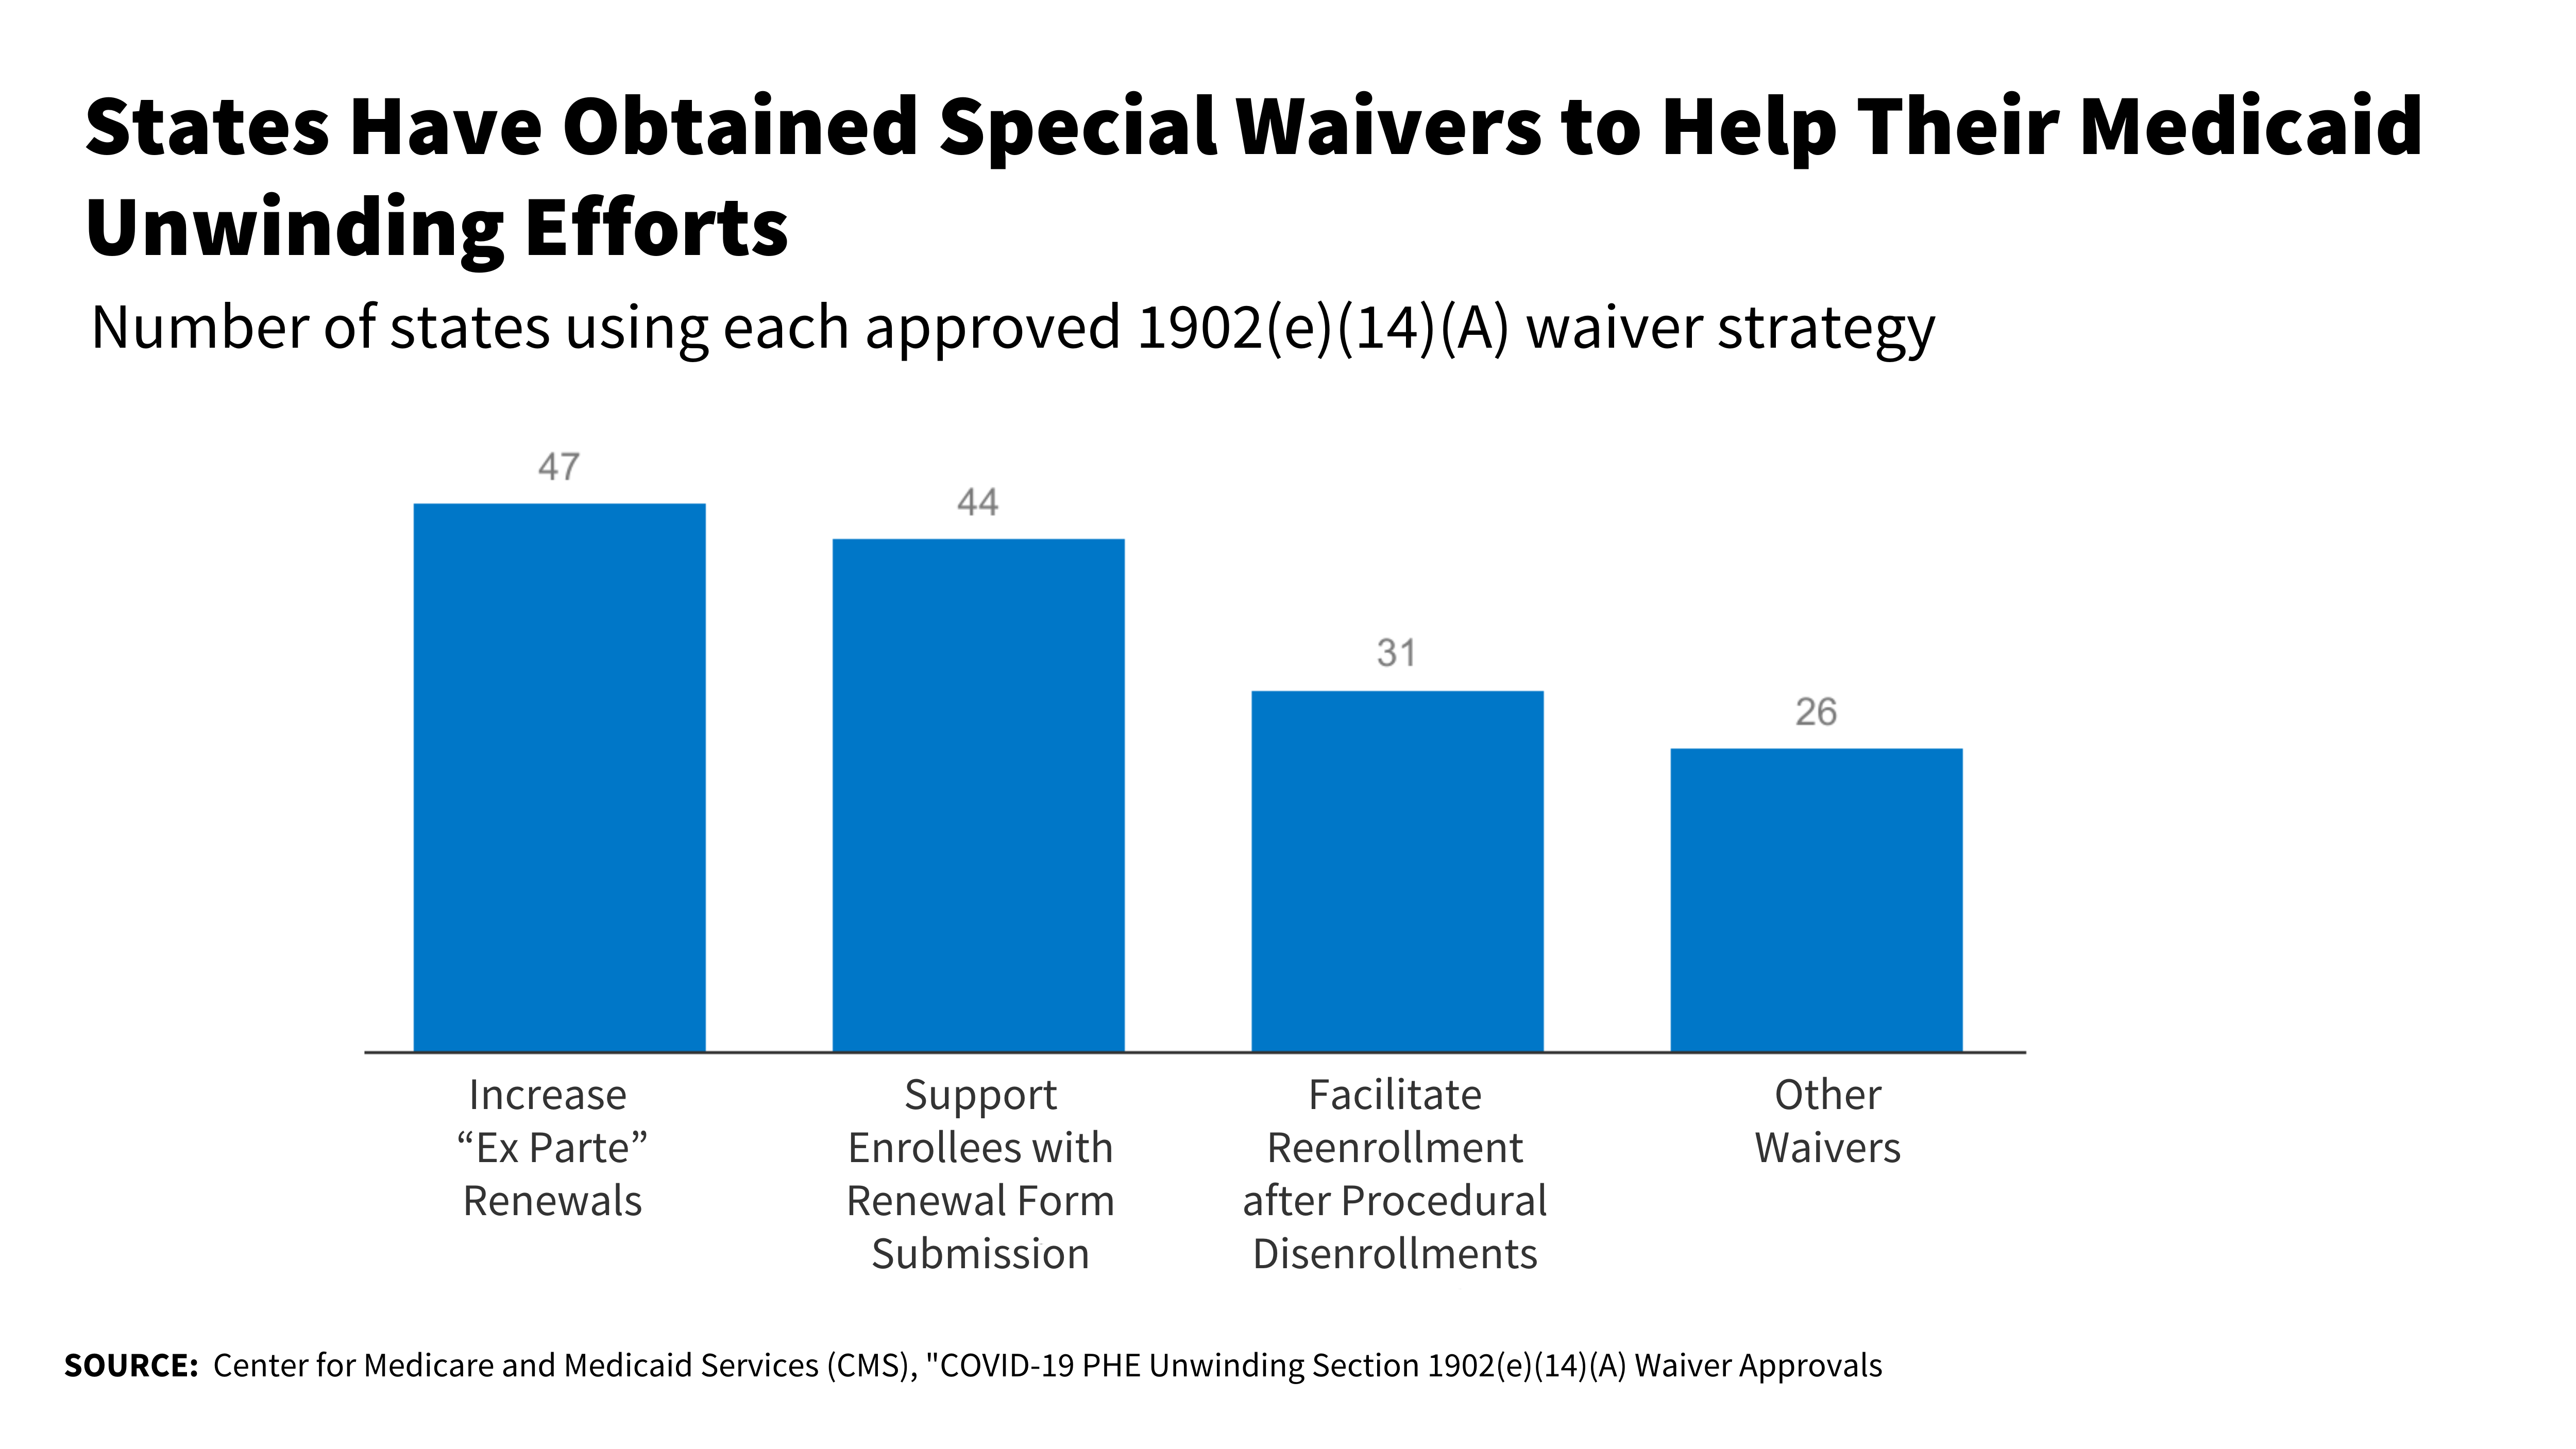 States Obtain Special Waivers to Help Unwinding Efforts